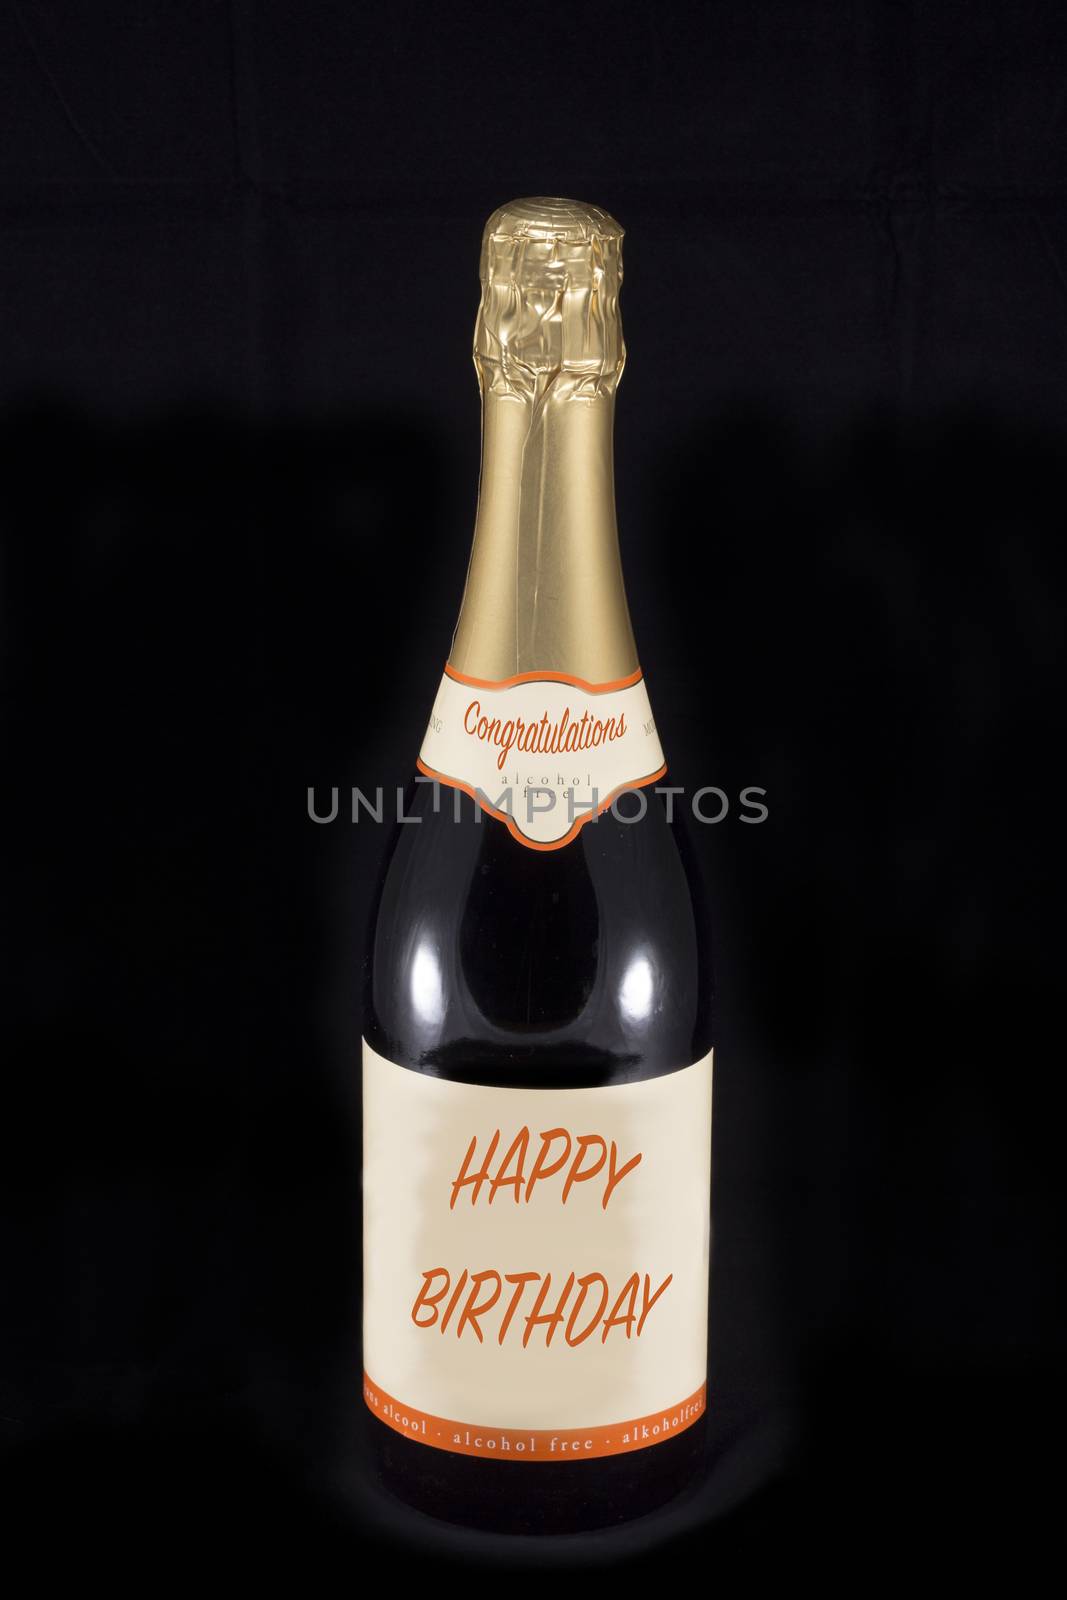 Champaign bottle with text Congratulations and Happy Birthday